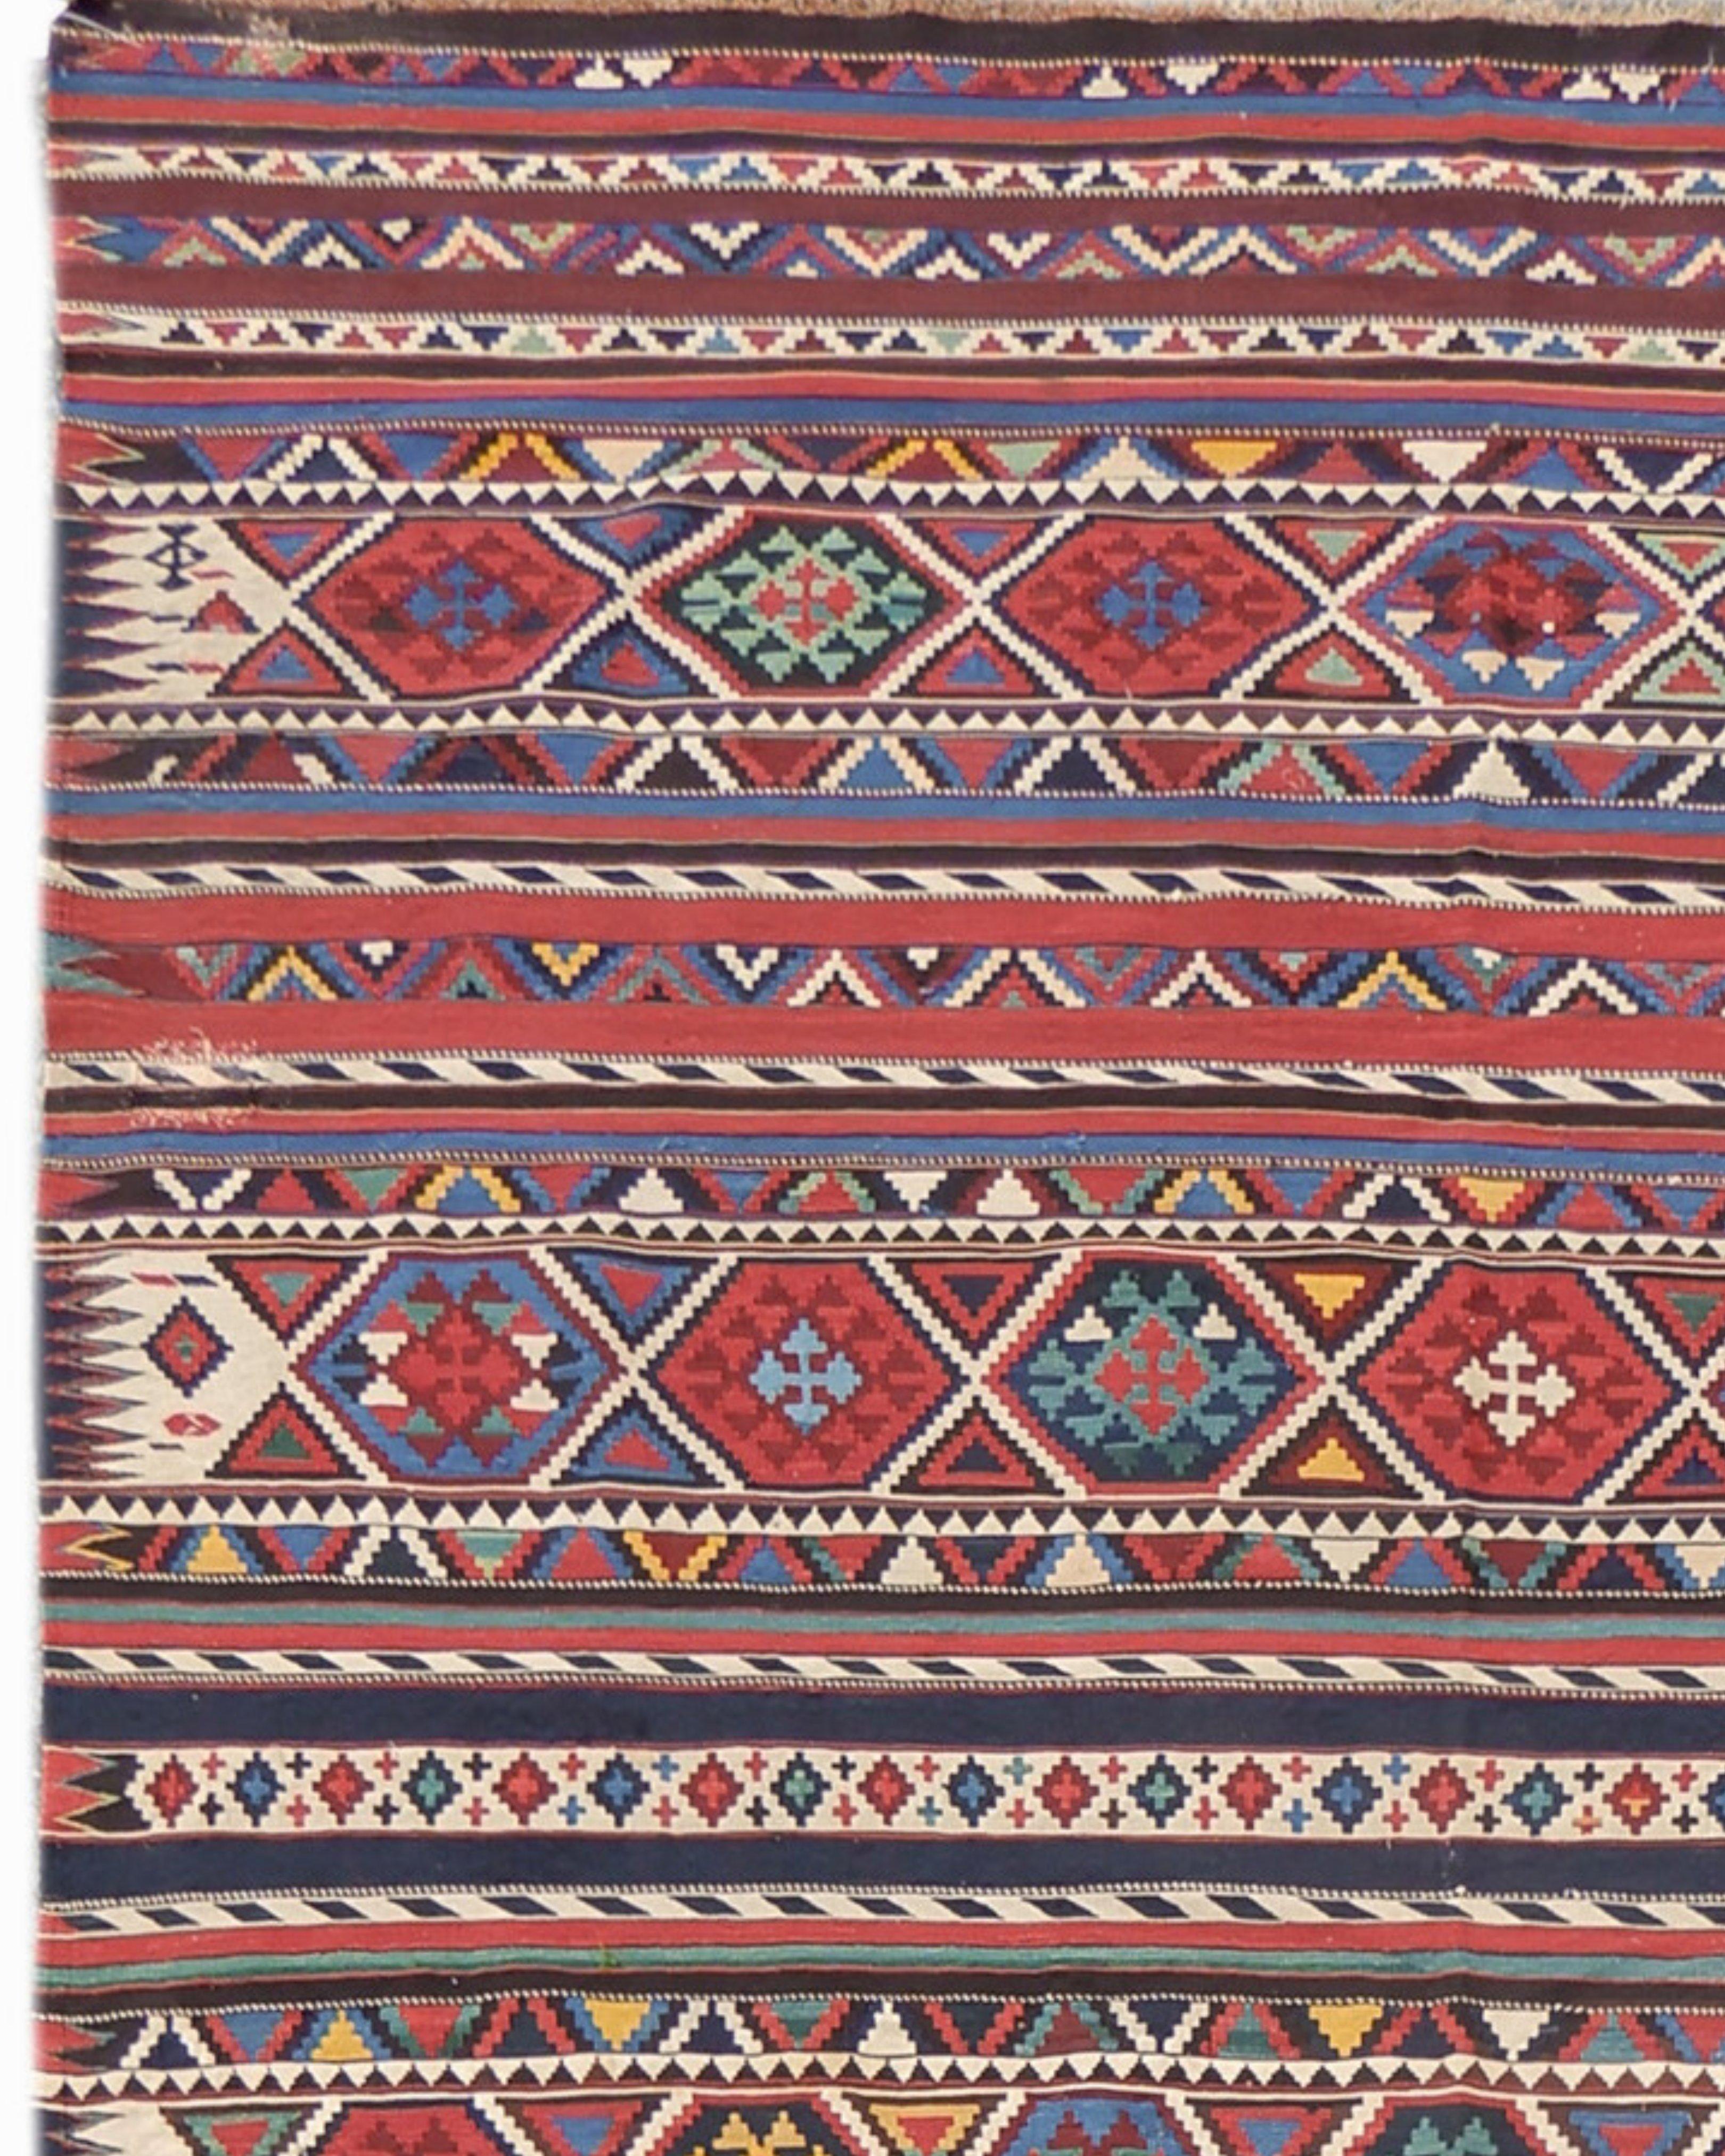 Hand-Woven Antique Caucasian Shirvan Kilim Rug, Late 19th Century For Sale